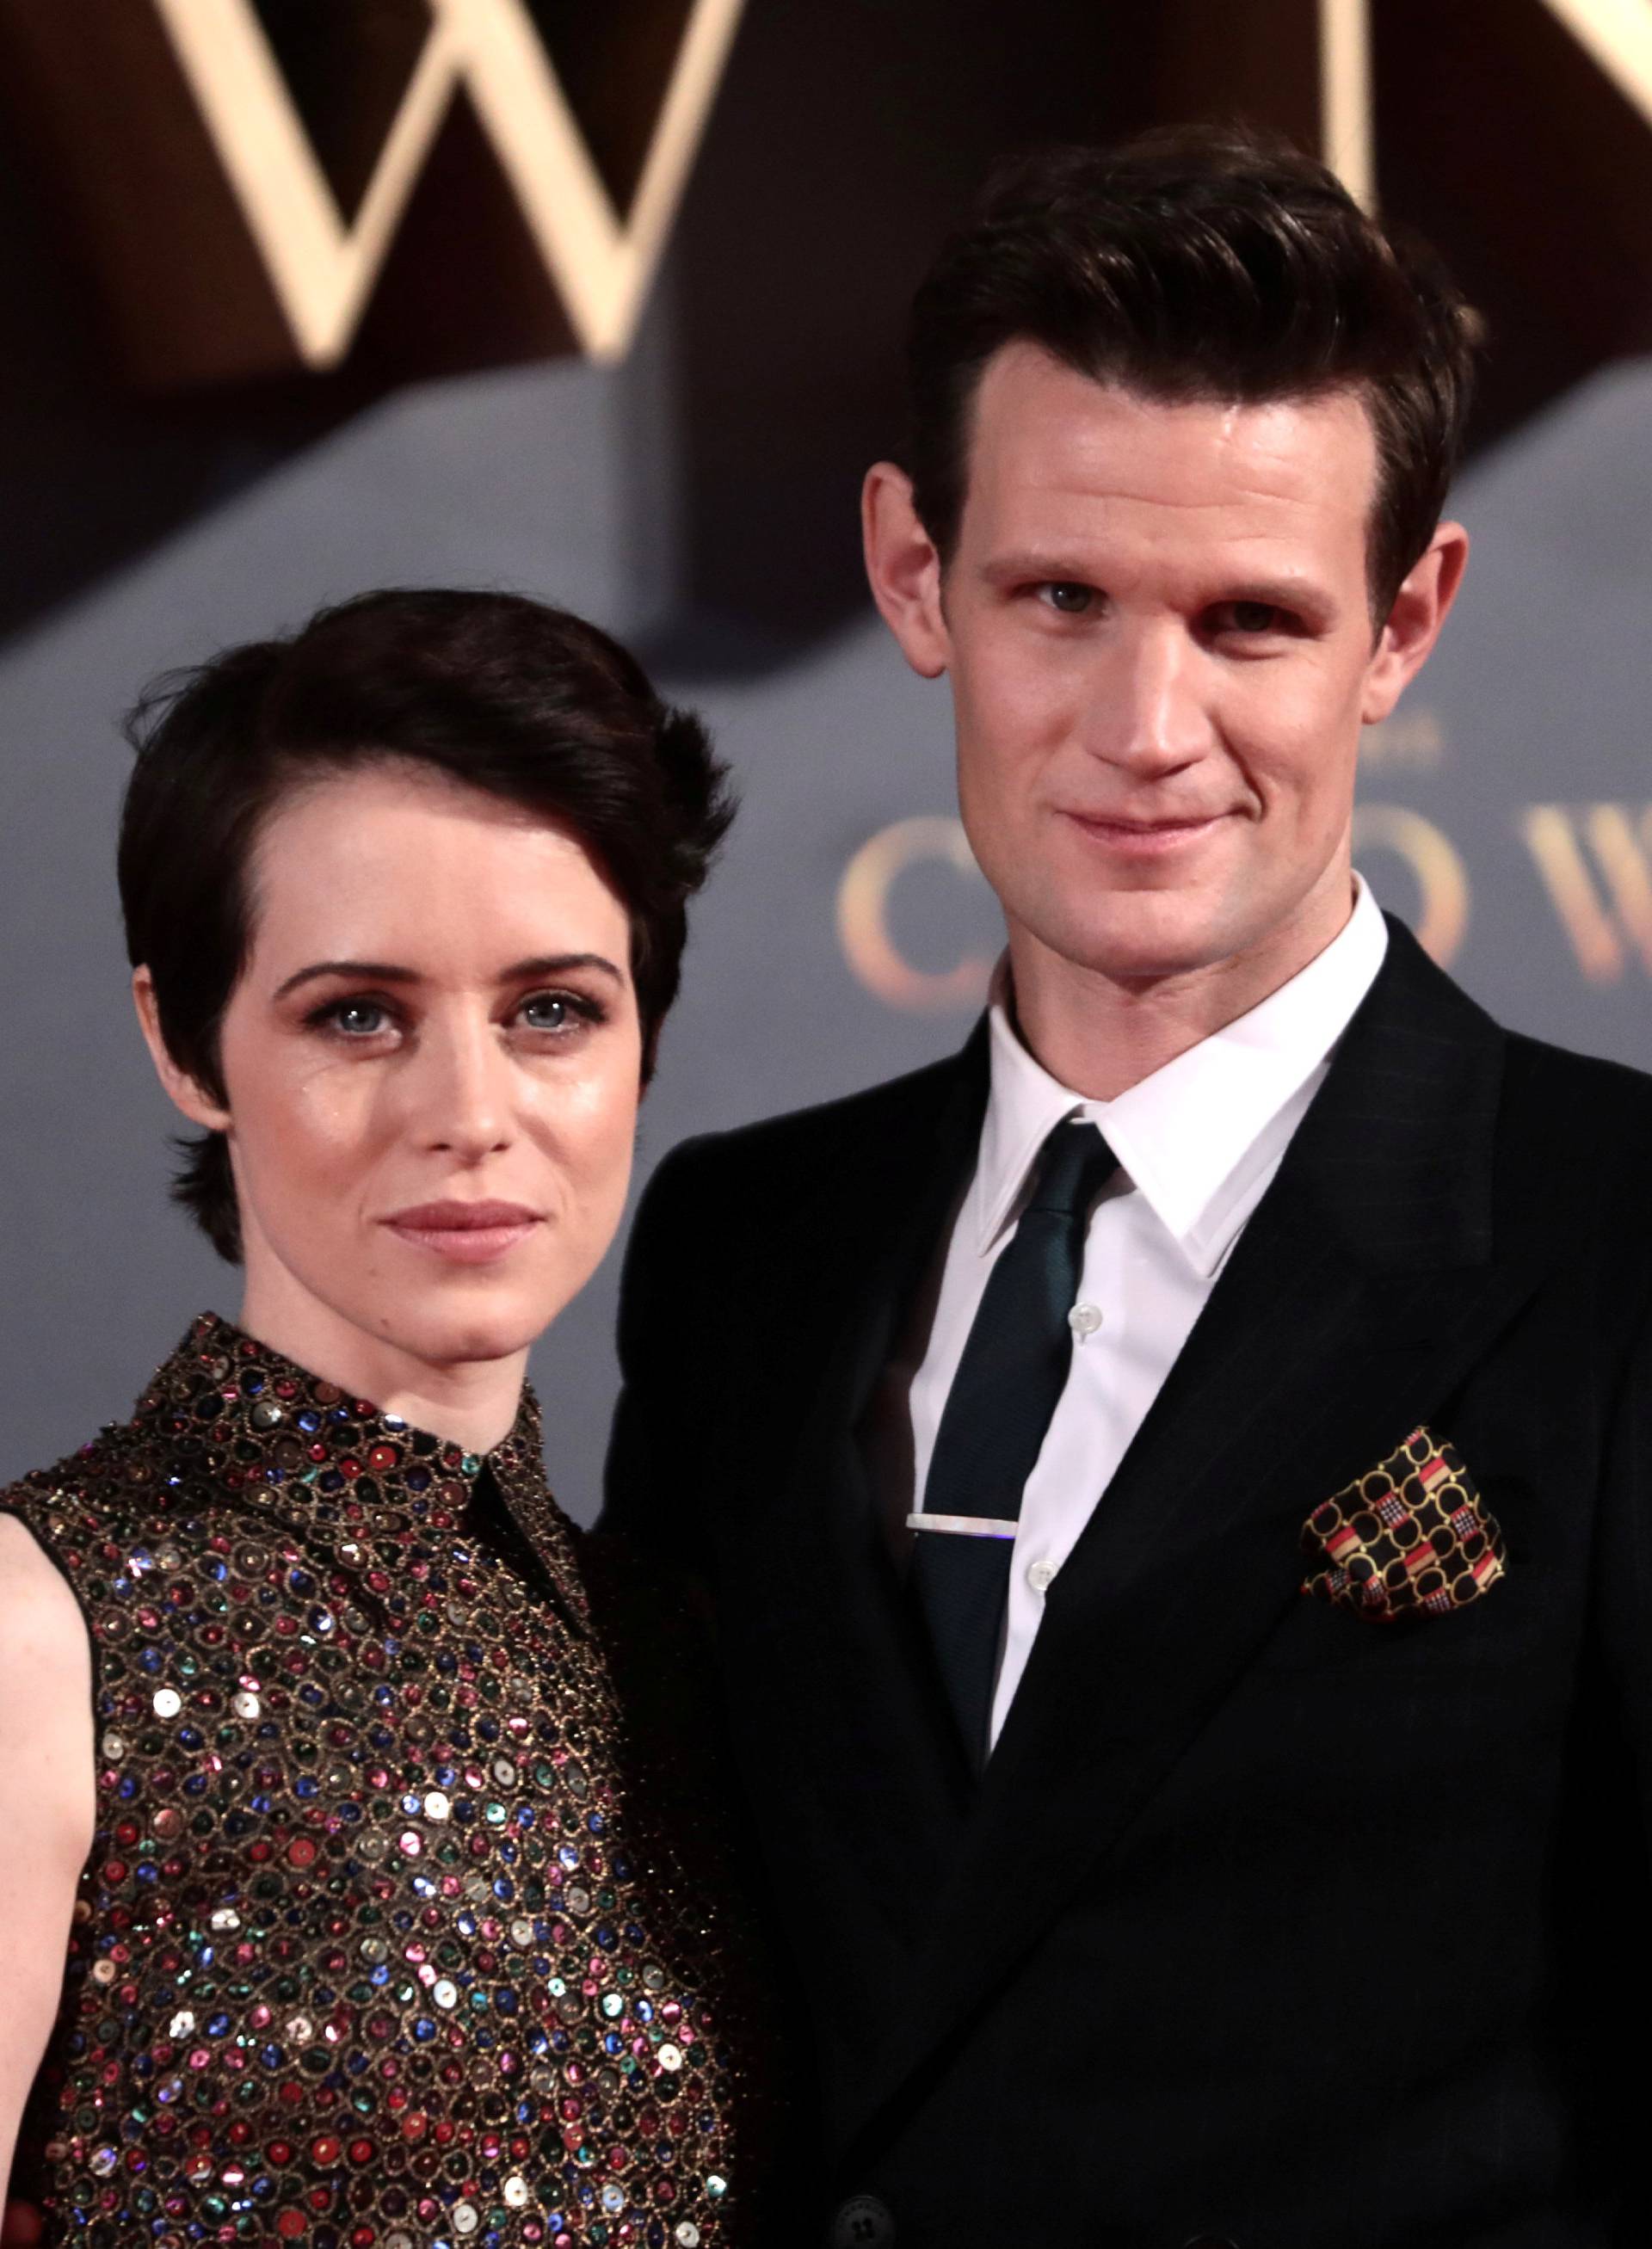 FILE PHOTO: Actors Claire Foy, who plays Queen Elizabeth II, and Matt Smith who plays Philip Duke of Edinburgh, attend the premiere of "The Crown" Season 2 in London